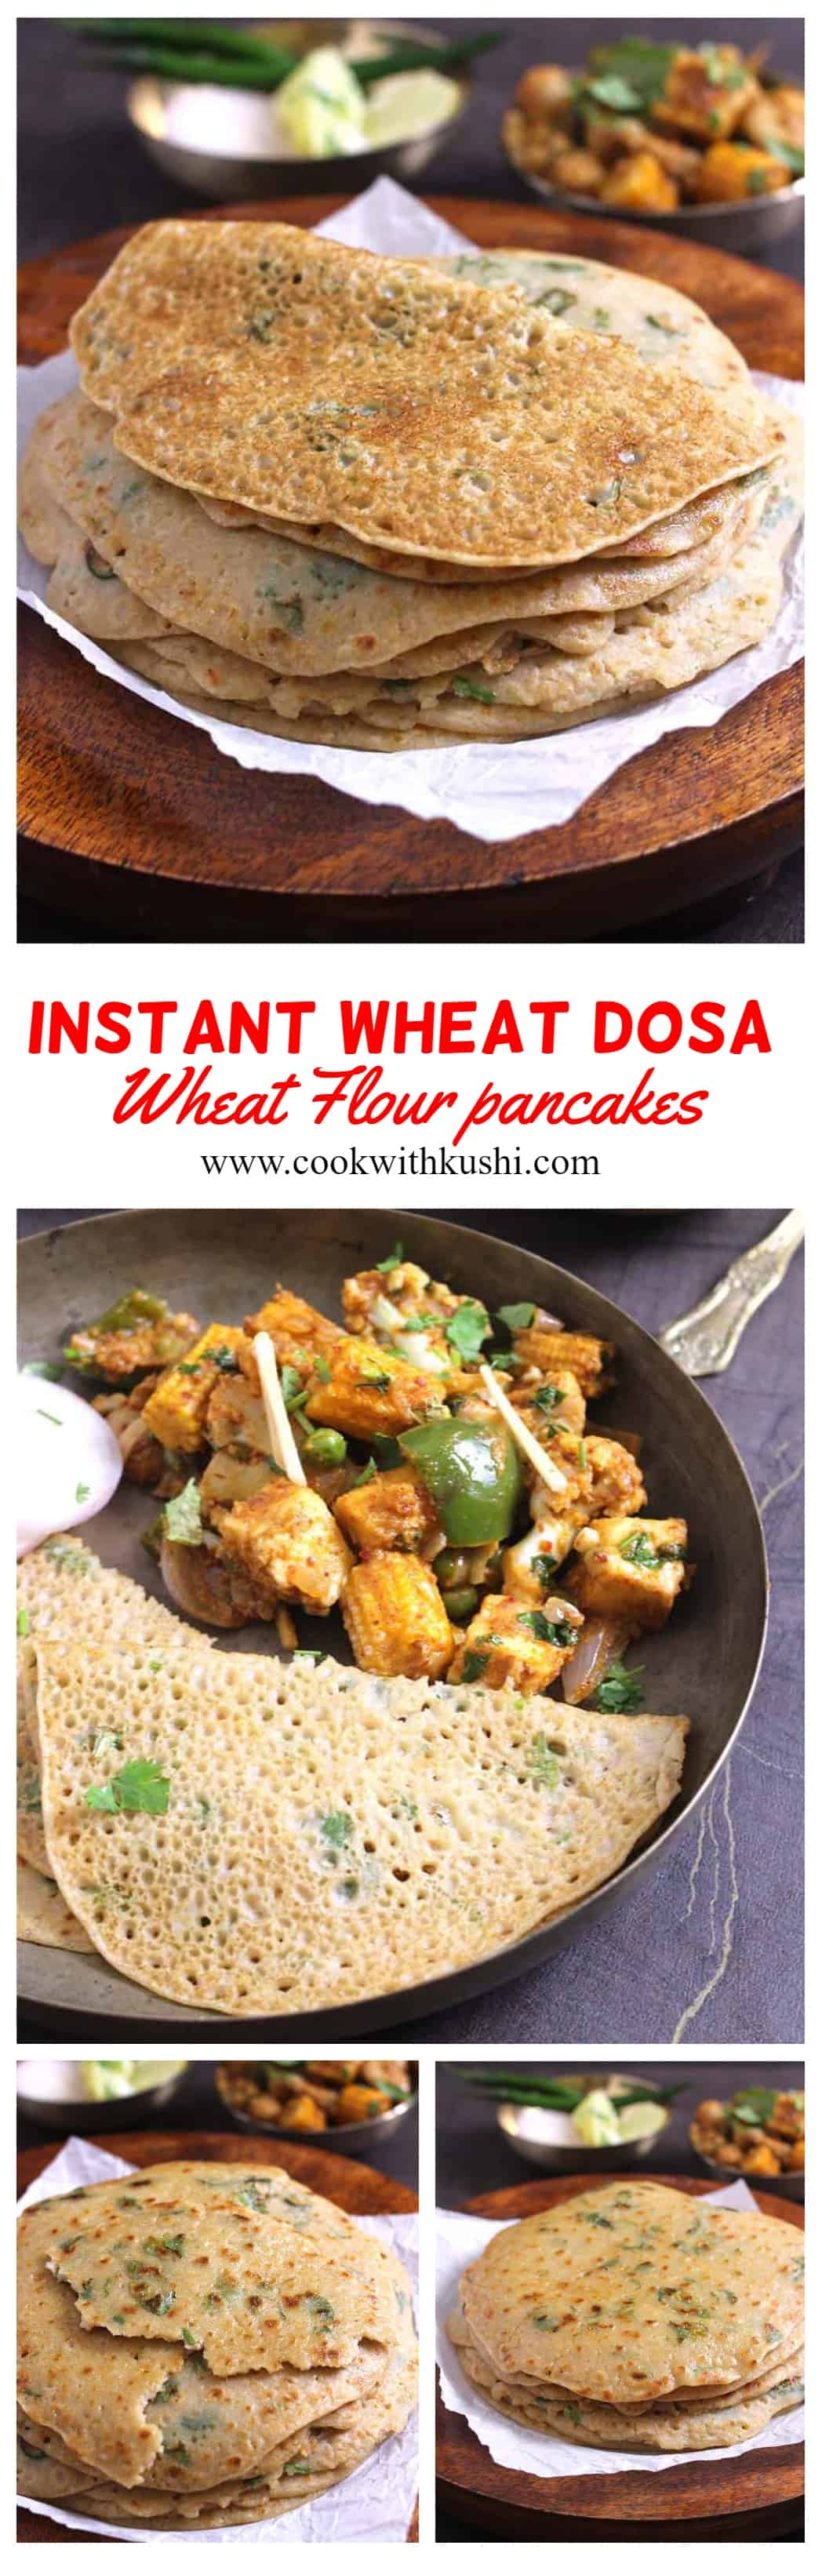 Instant wheat dosa is one of the easiest and tasty, healthy recipes prepared in less than 20 minutes for breakfast, lunch, or dinner #dosa #indianfood #indianpancakes #batter #Ingredients #nofermenattion